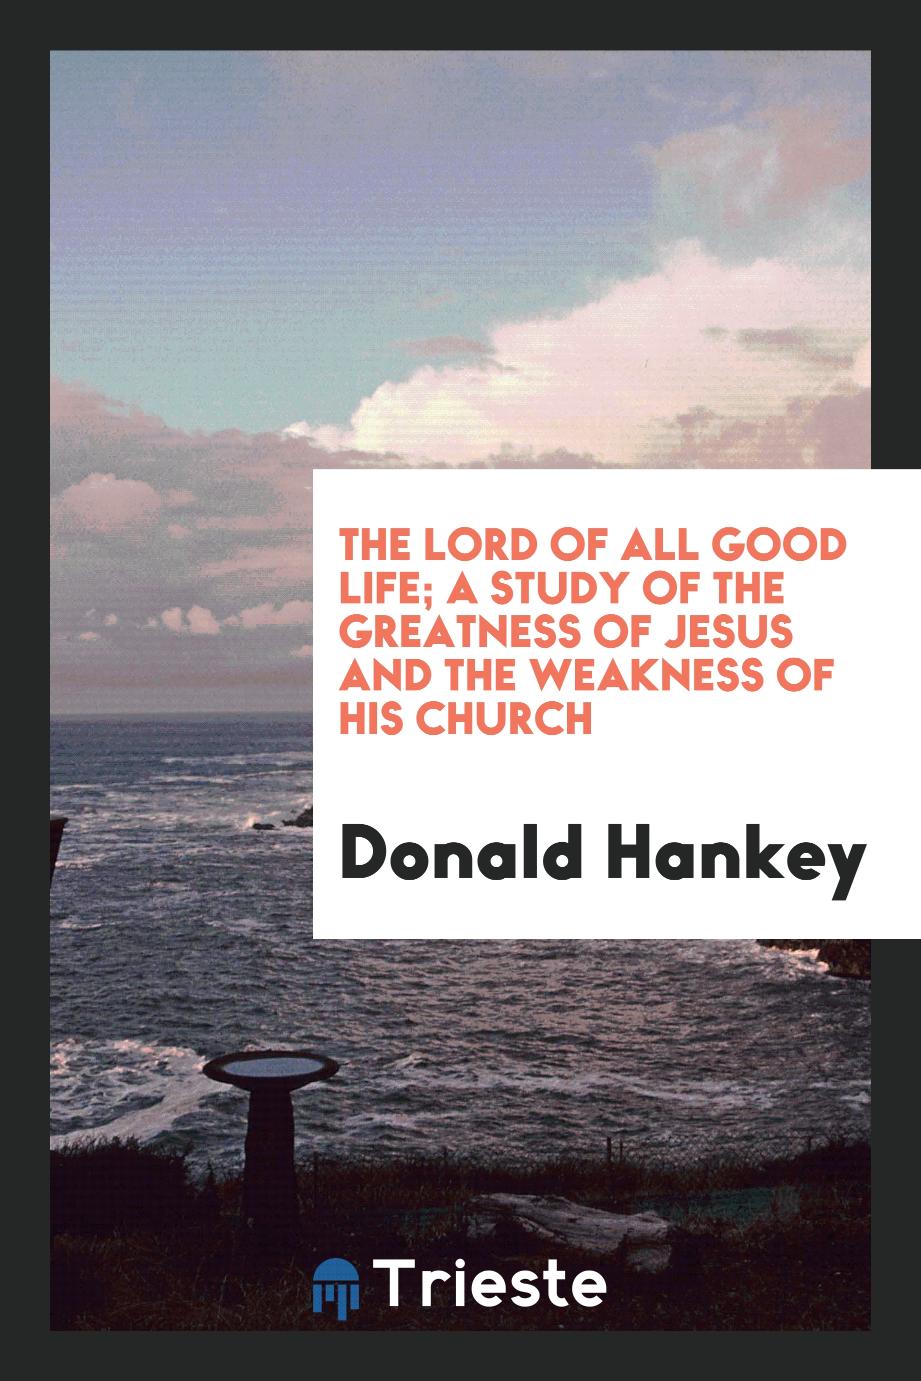 The Lord of all good life; a study of the greatness of Jesus and the weakness of His church